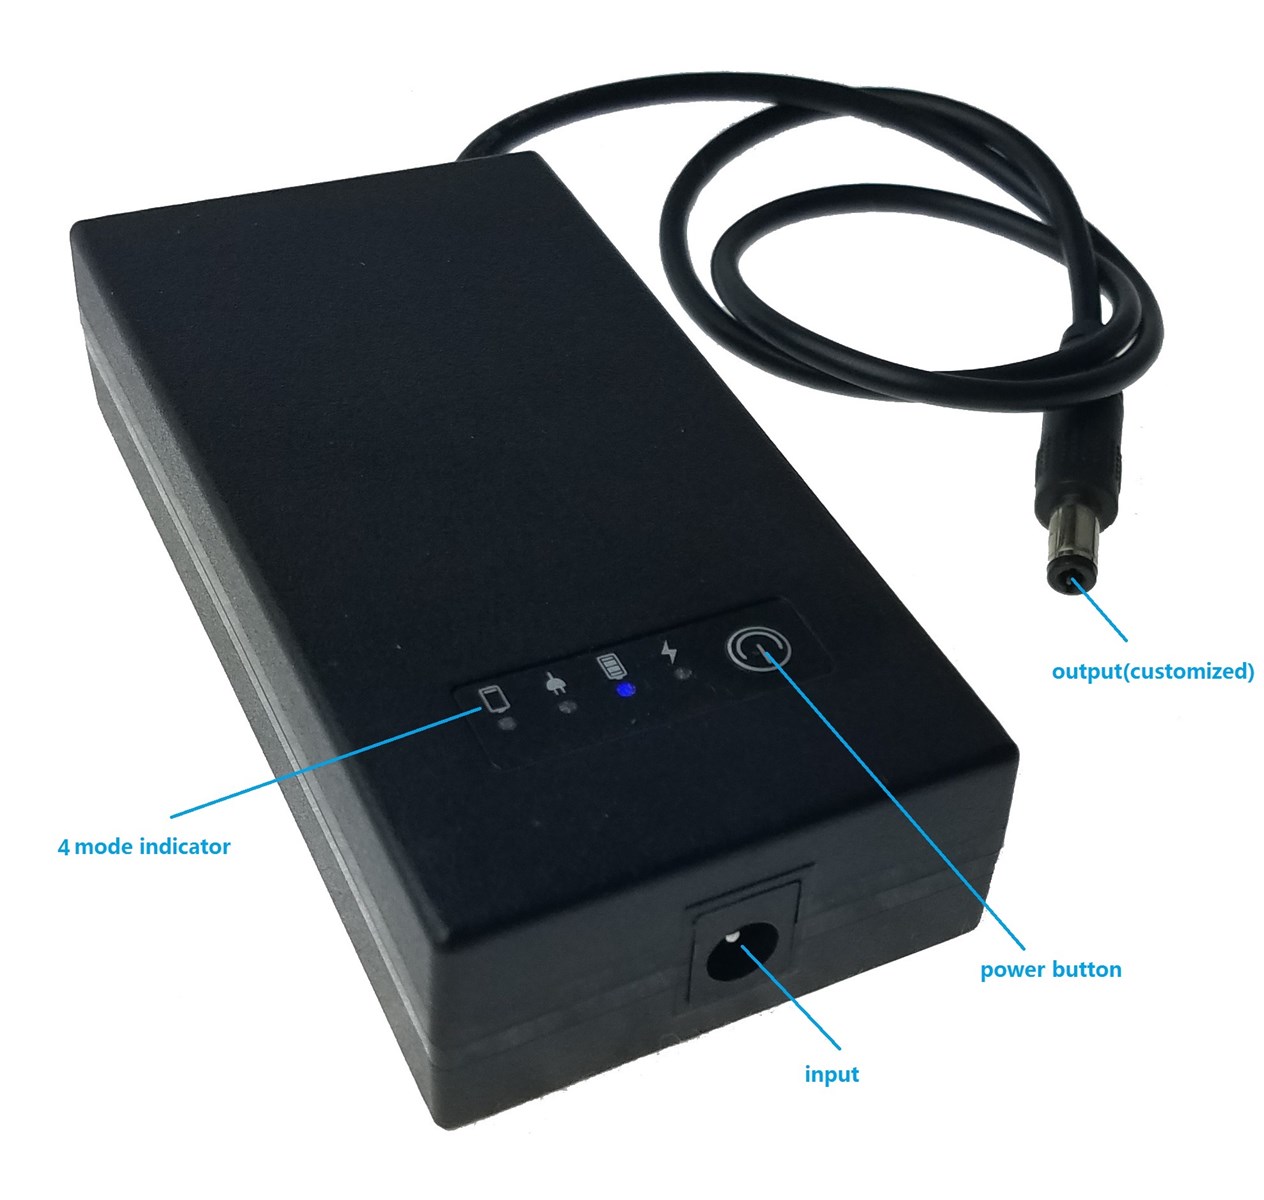 China mini UPS manufacturer 12V 1A lithium battery backup house UPS system for house appliance